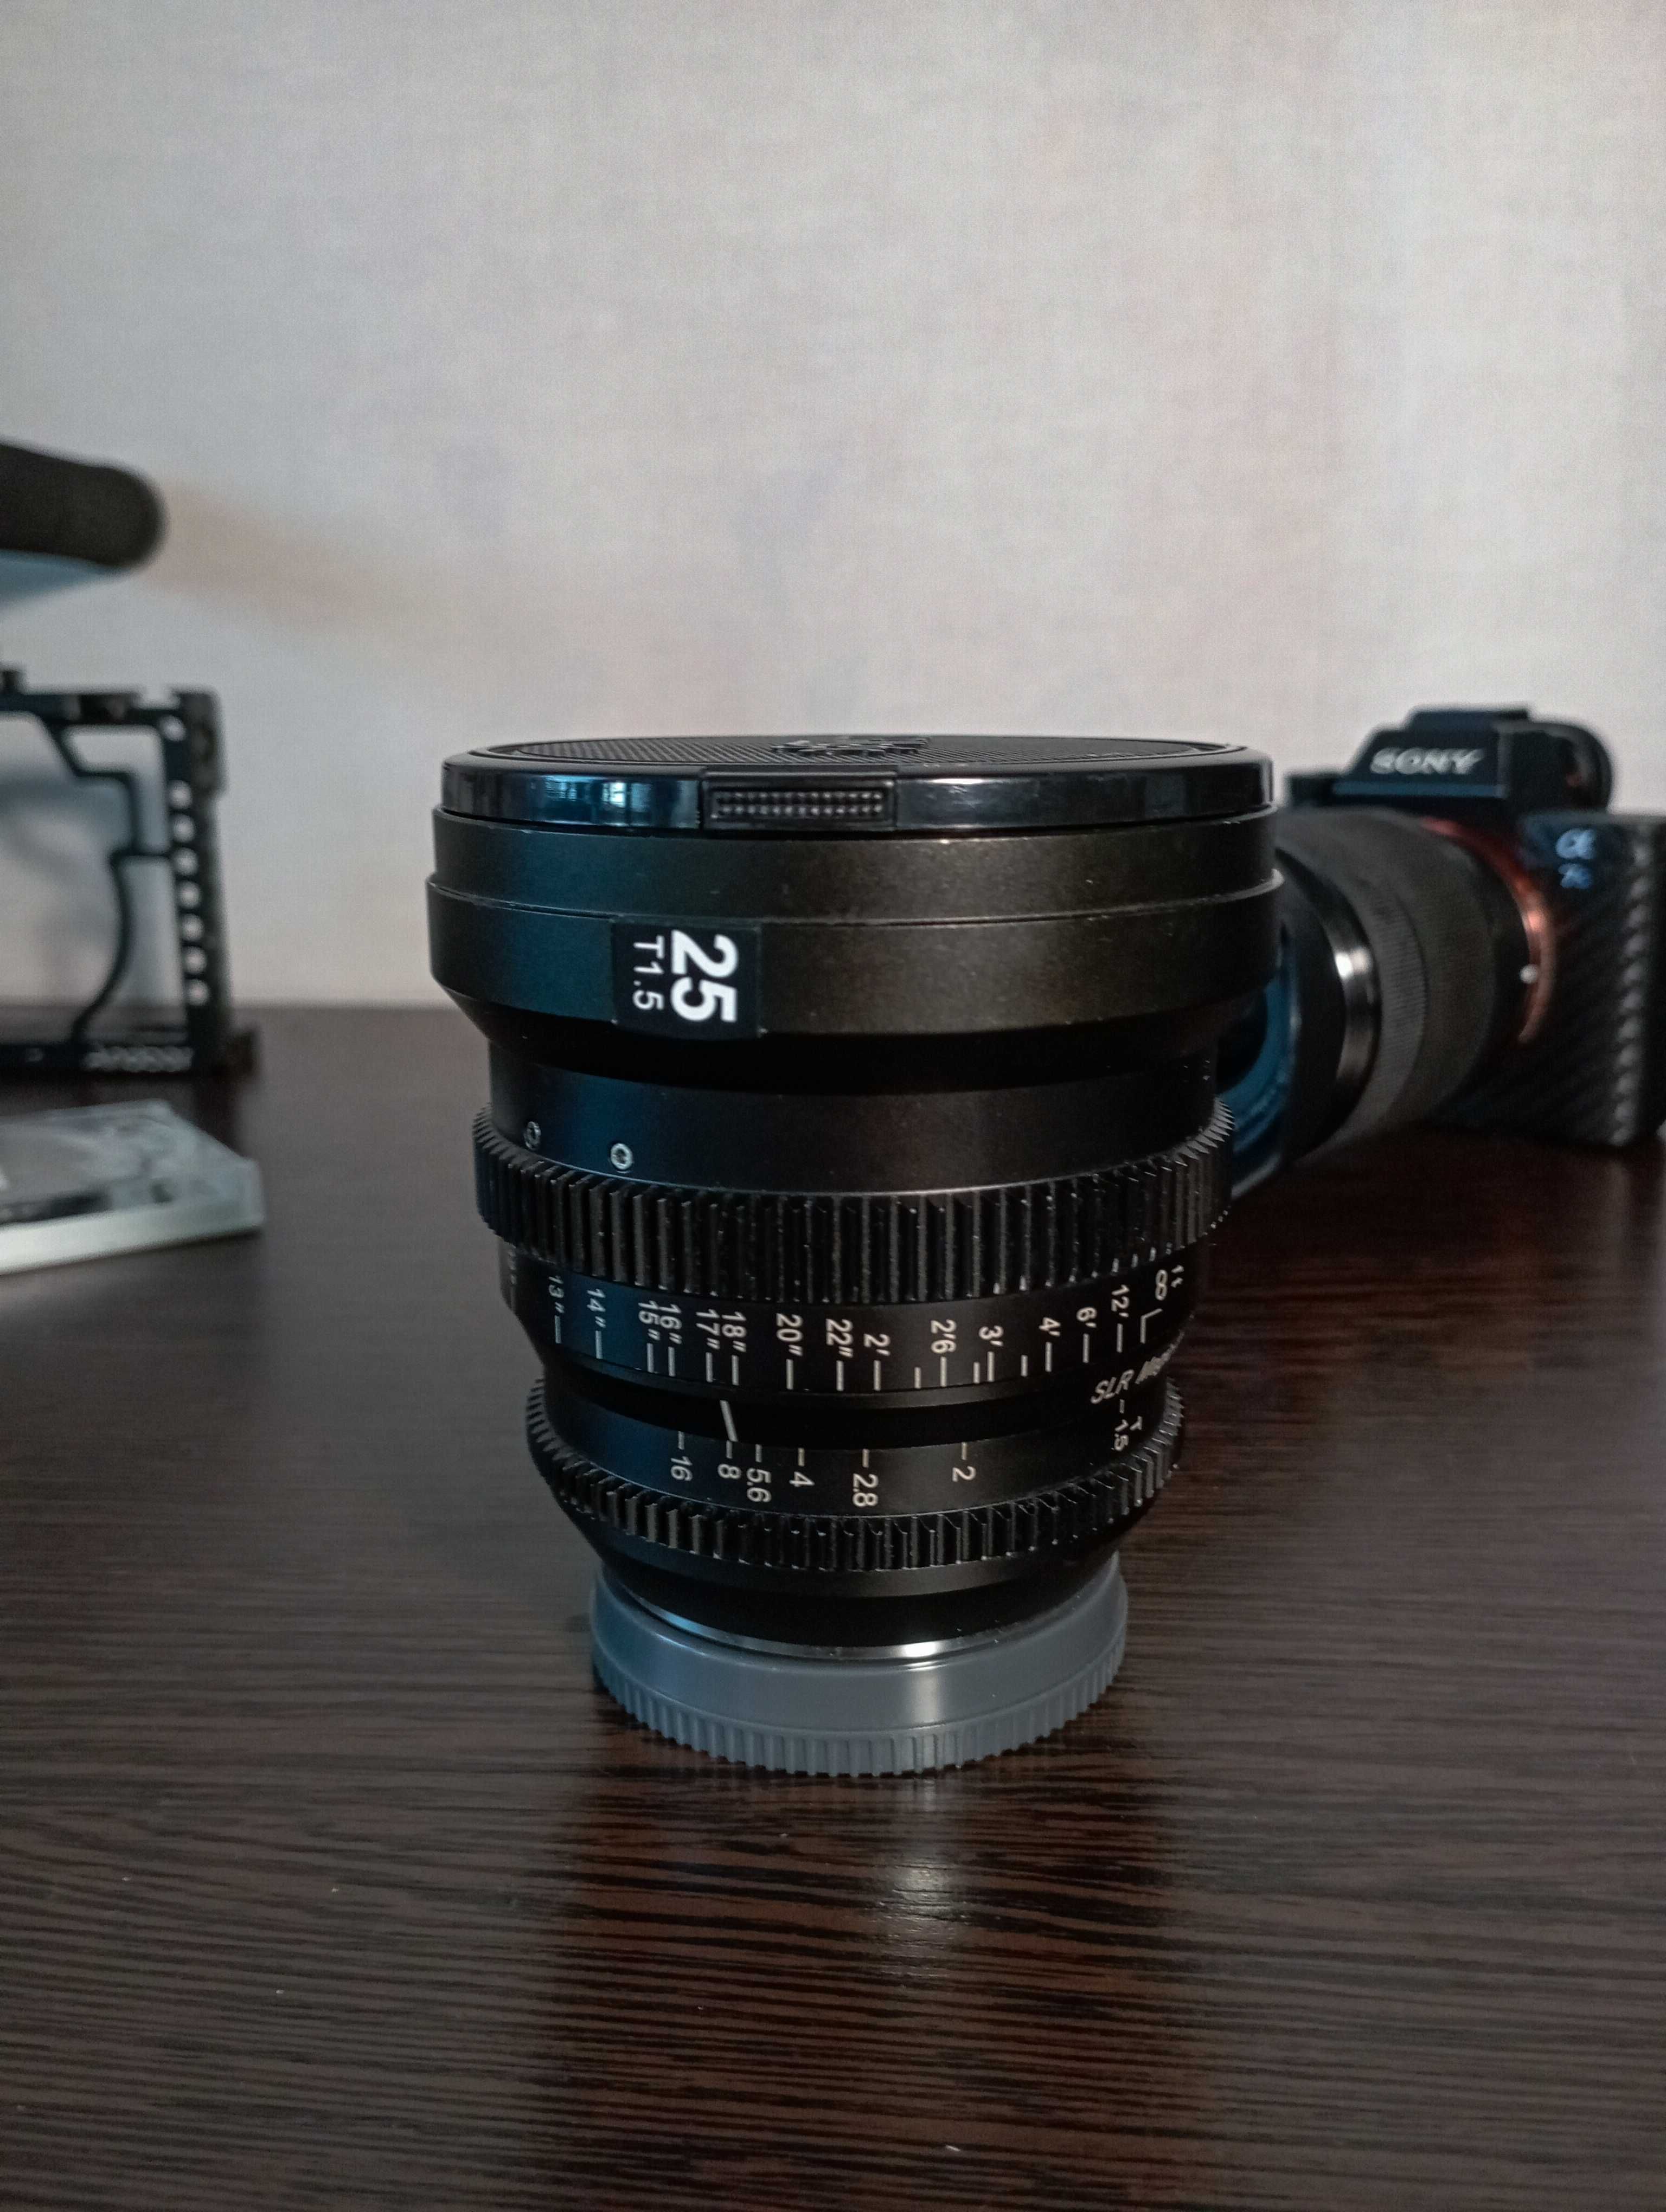 Sony A7s2 + SLR Microprime 25mm Т 1.5, Sony FE 28-70mm